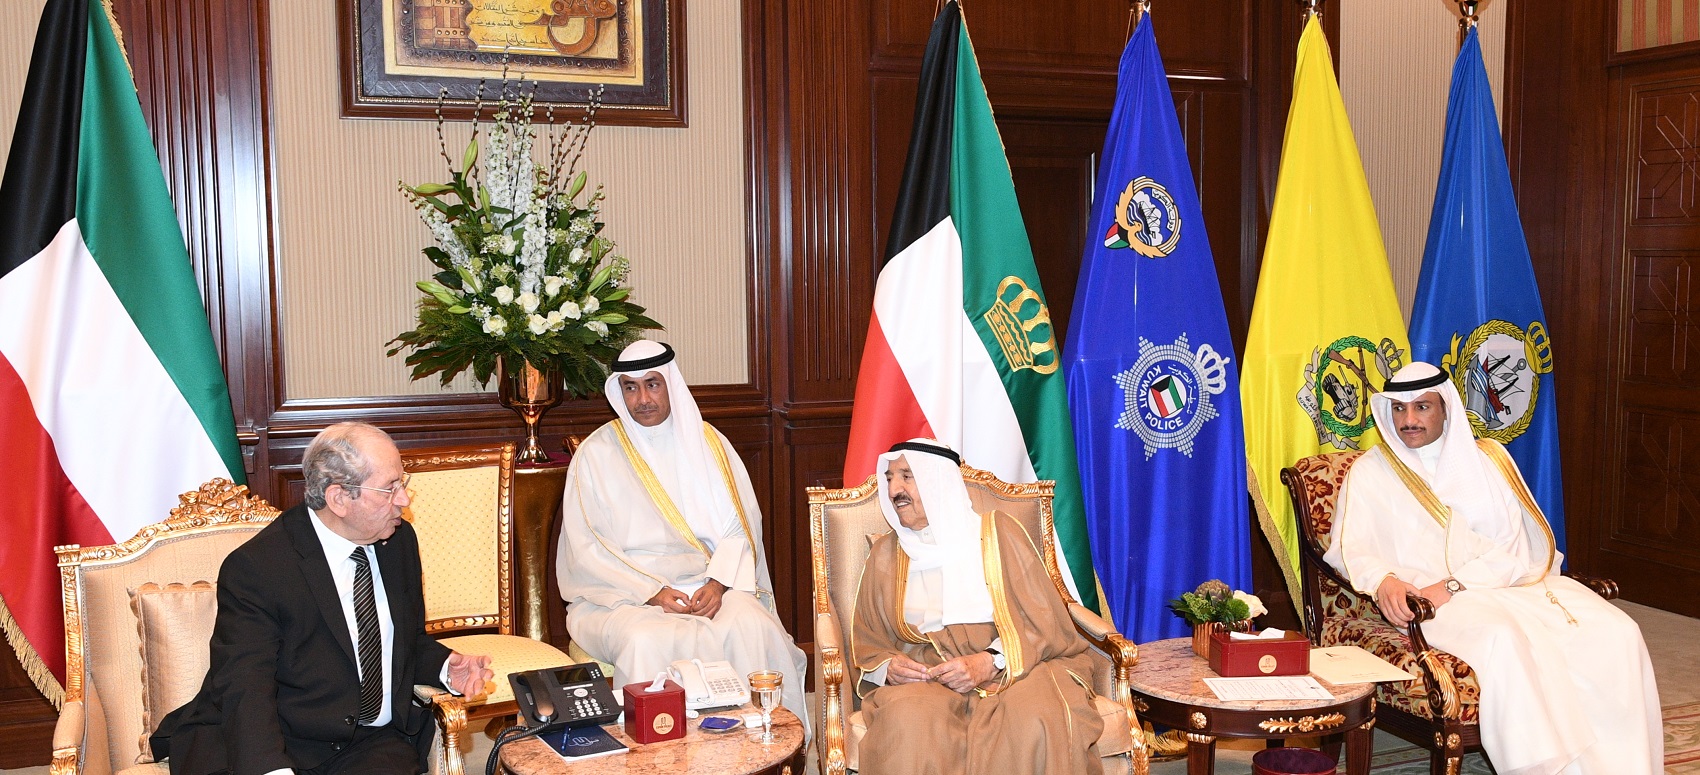 His Highness the Amir Sheikh Sabah Al-Ahmad Al-Jaber Al-Sabah receives Parliament Speaker Marzouq Al-Ghanim and Tunisian Assembly of the Representatives of the People Mohammad Ennaceur and his accompanying delegation